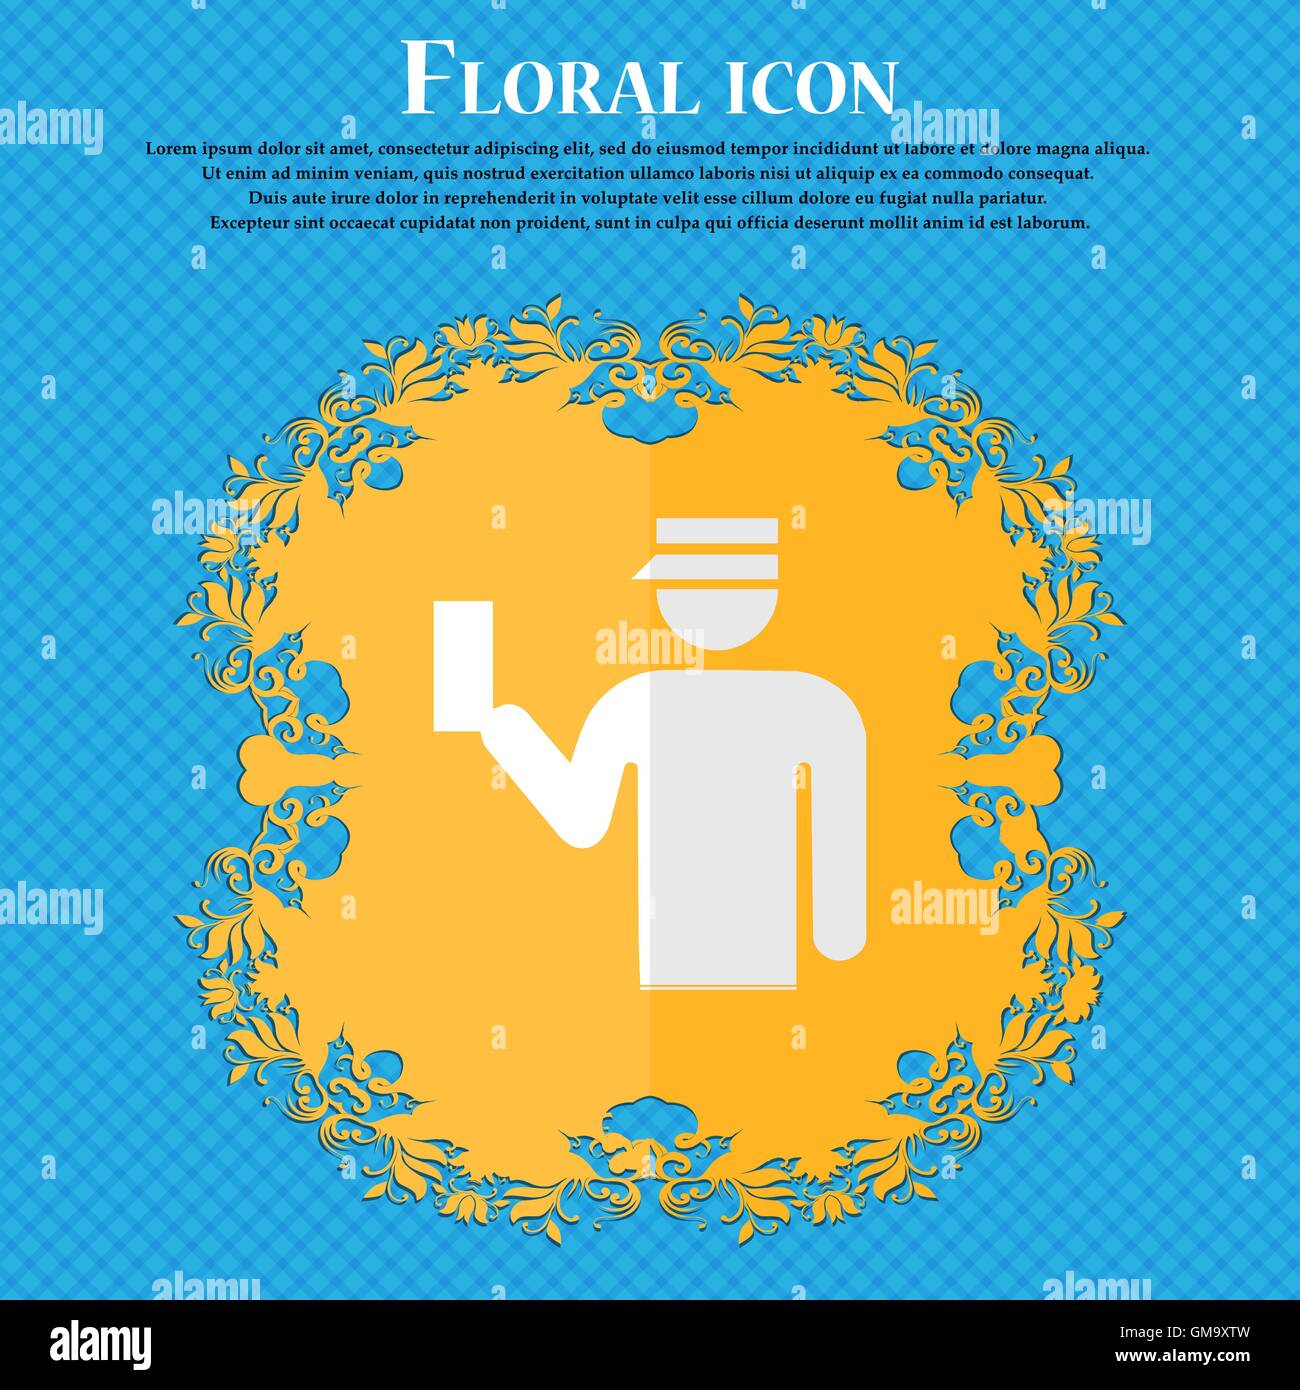 Inspector. Floral flat design on a blue abstract background with place for your text. Vector Stock Vector